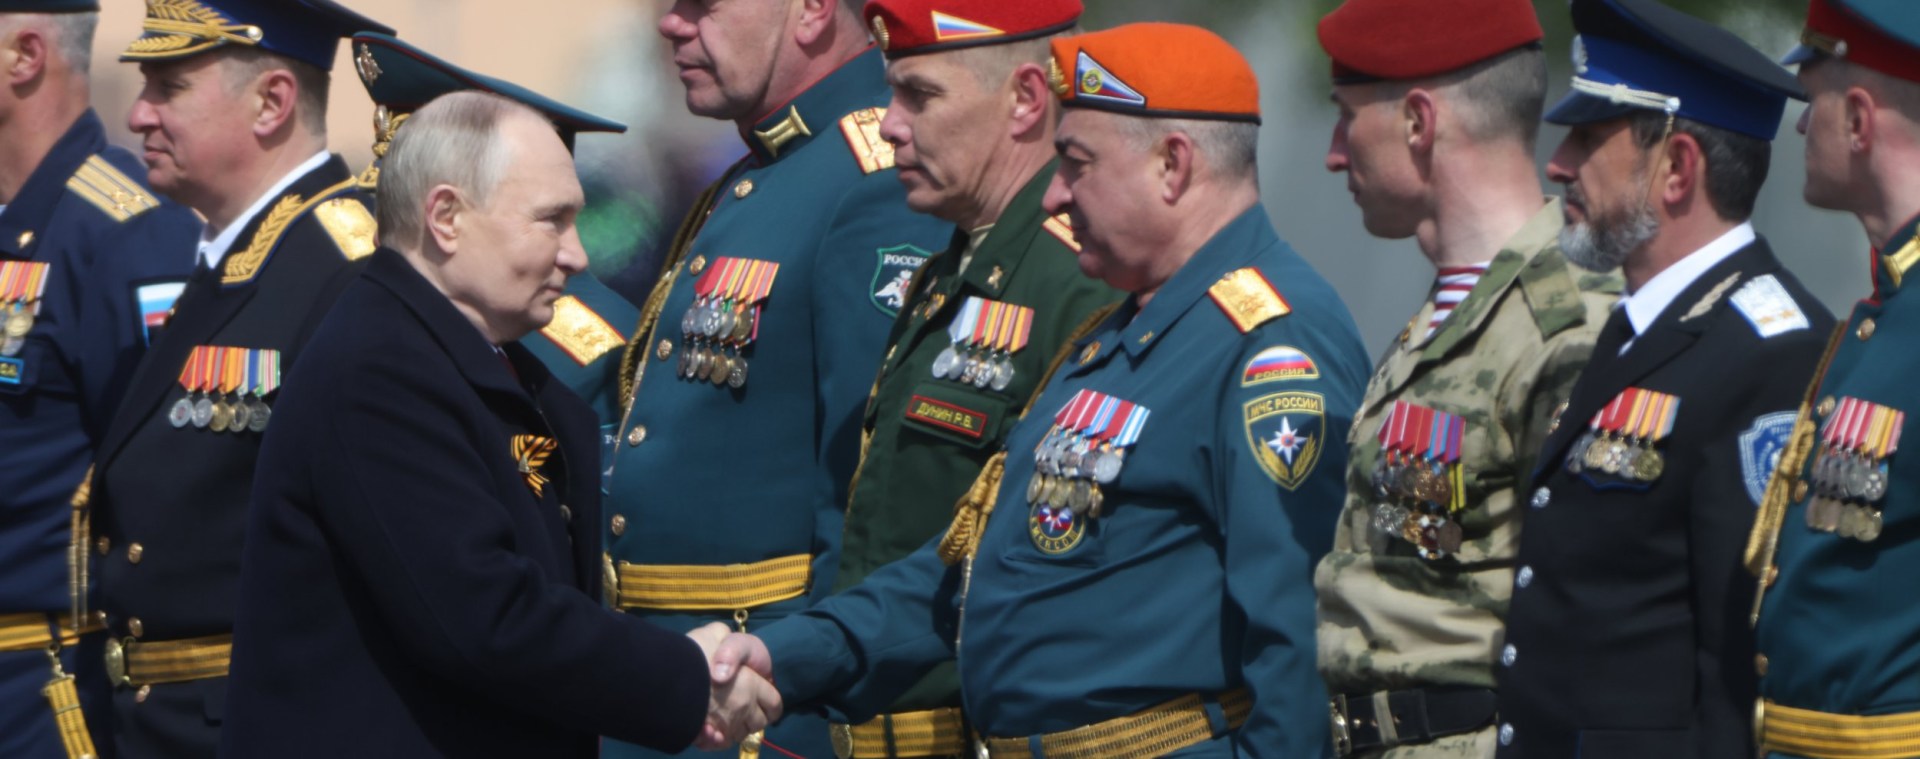 hackers target coverage of putin's victory day parade to compare him to hitler